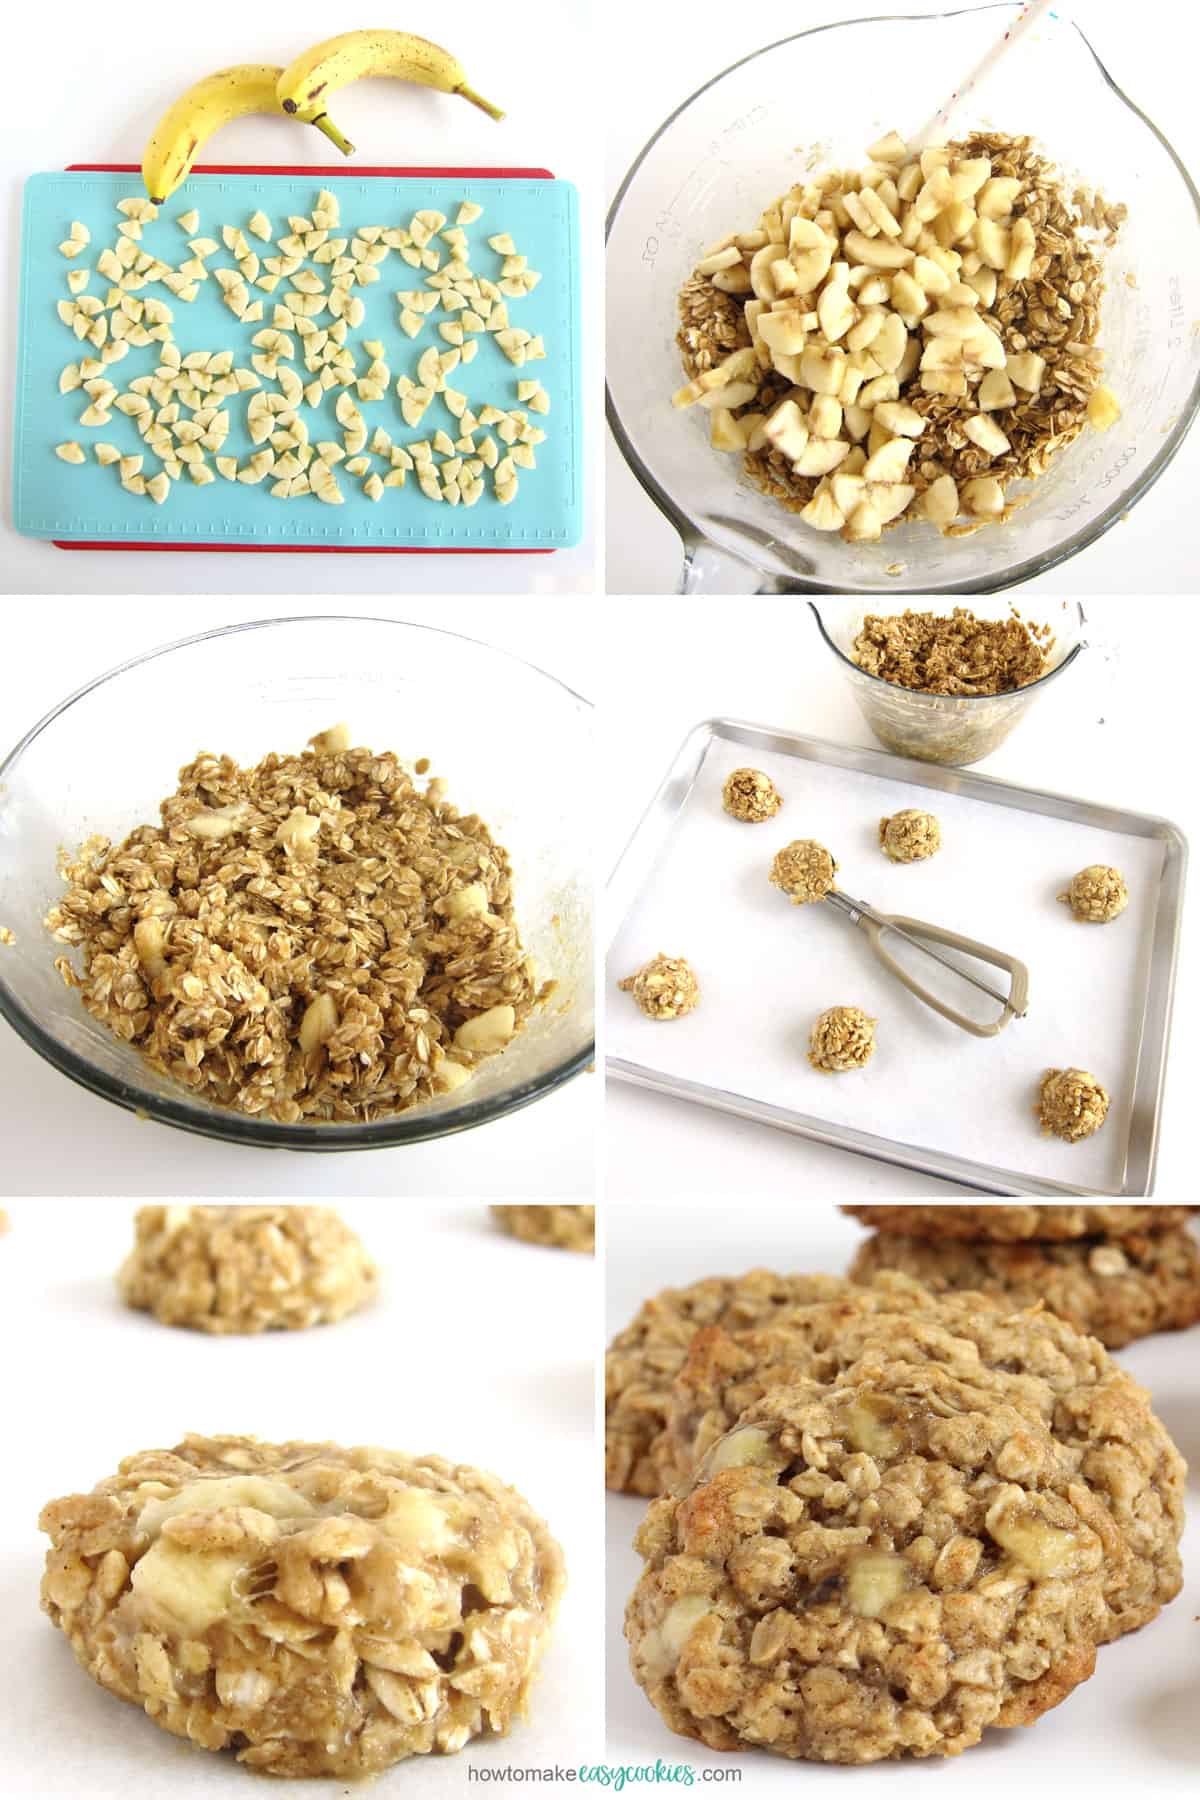 cut bananas into small pieces, then mix into the oatmeal cookie dough, scoop, and bake